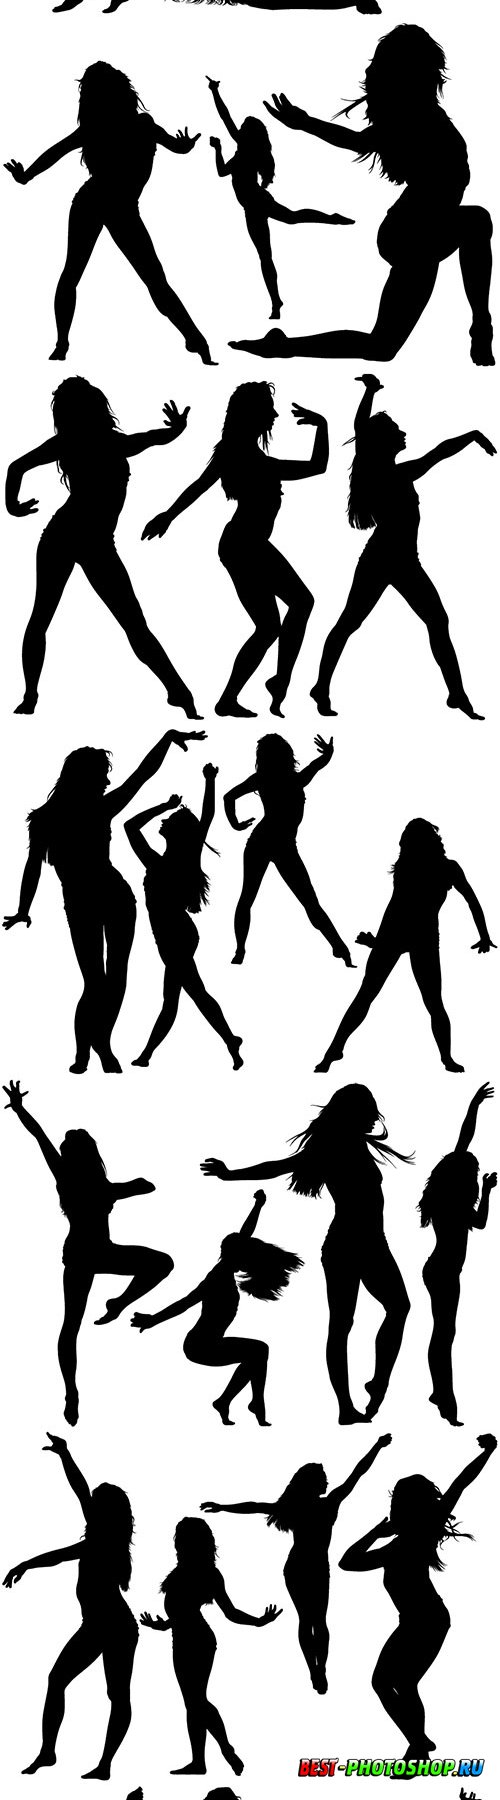 Silhouetted dancing young woman in various poses